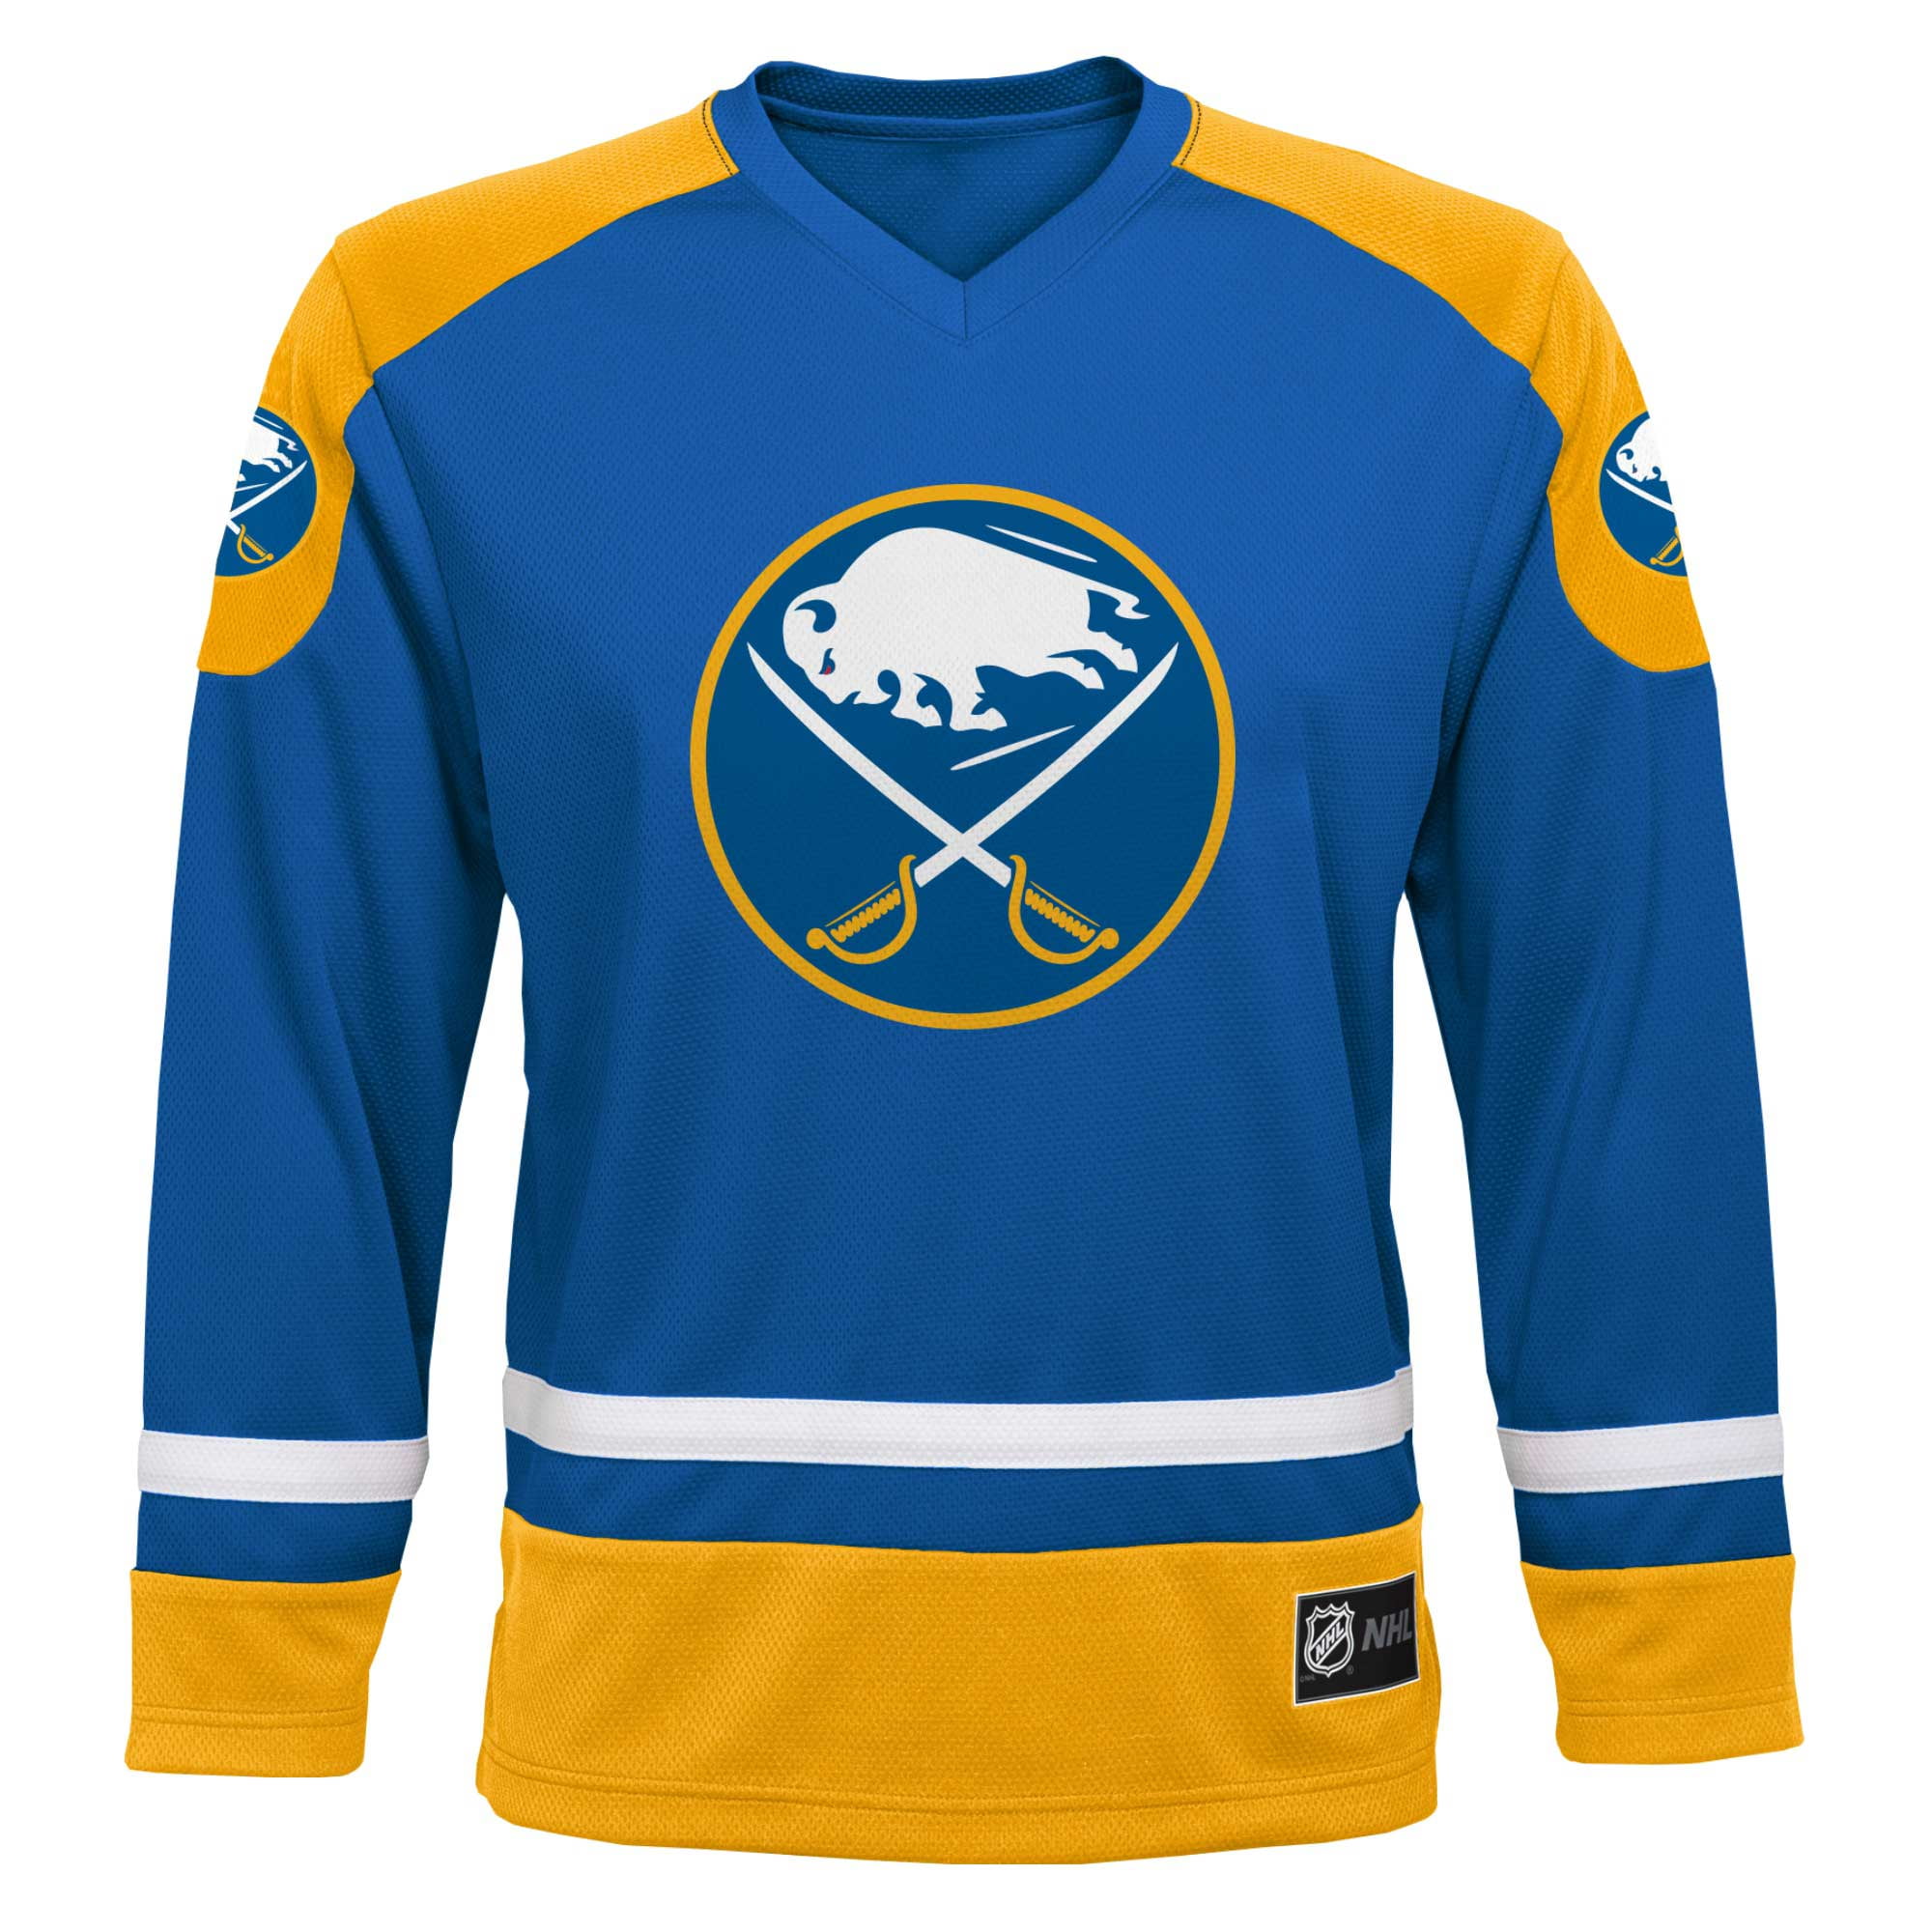 Tuch 3rd Jersey help (youth) : r/sabres